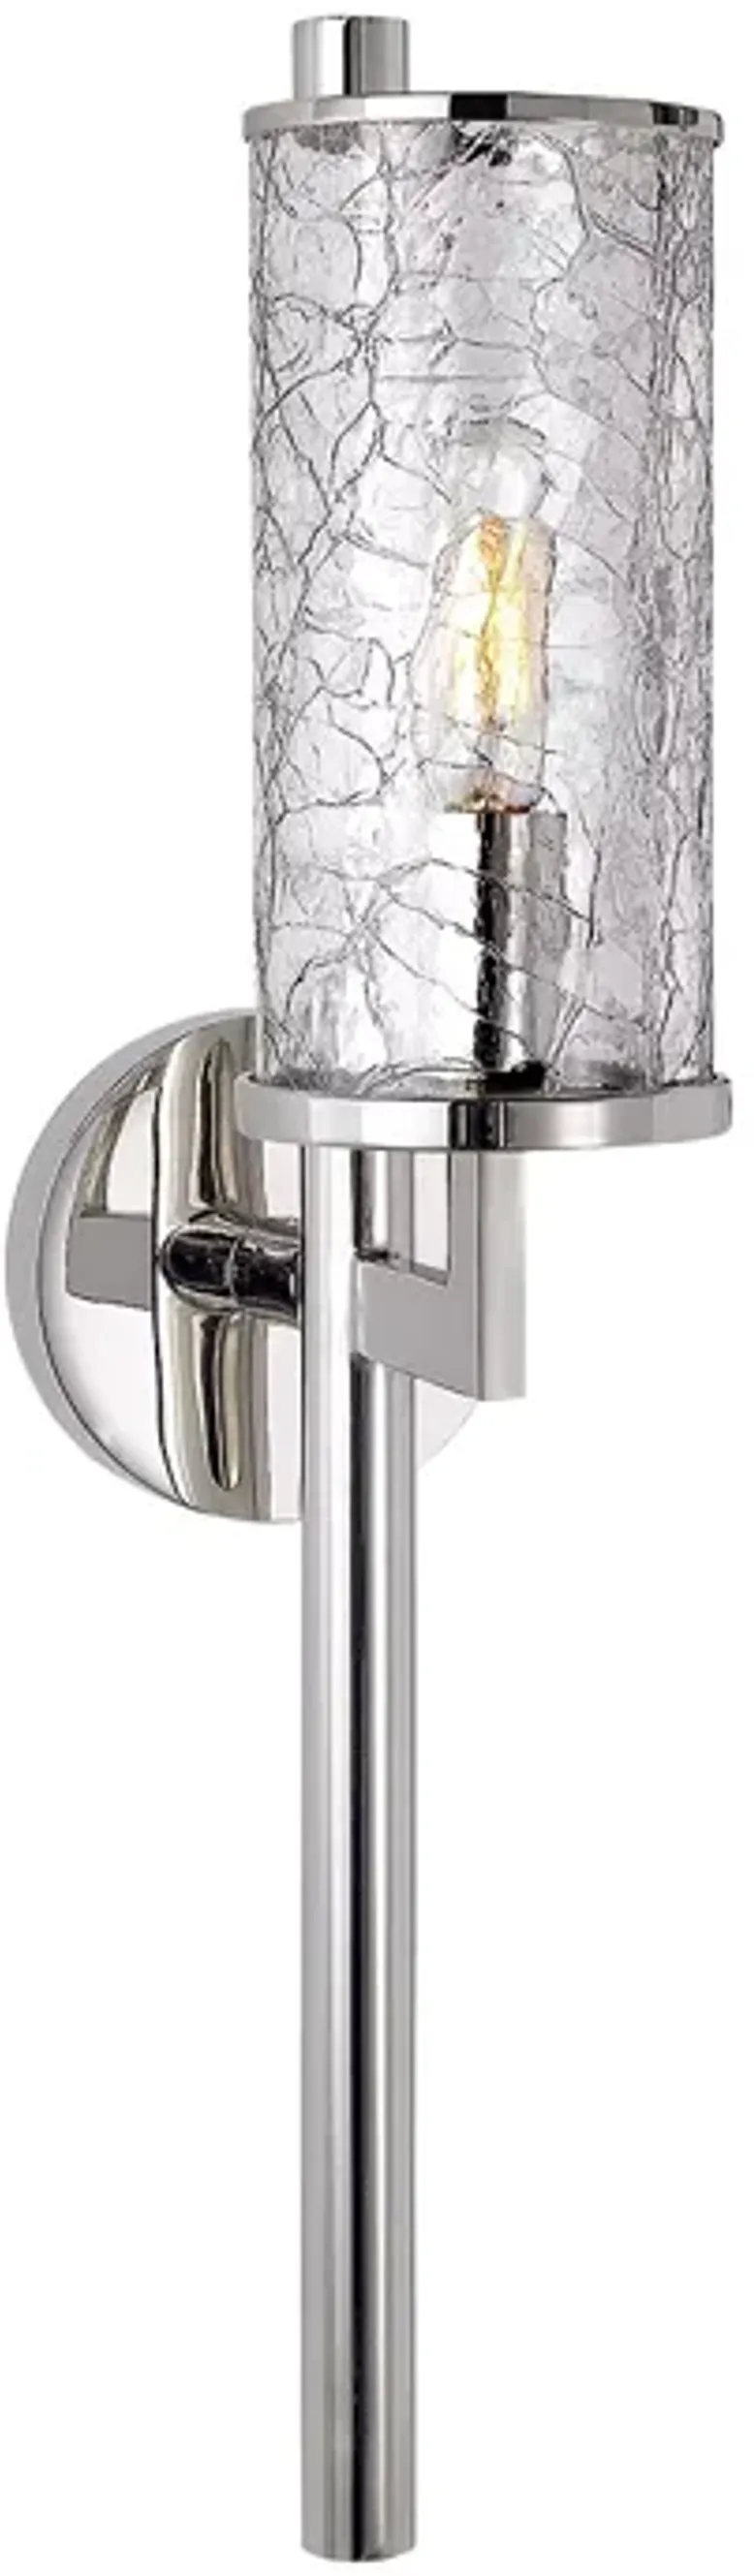 Kelly Wearstler Liaison Single Sconce with Crackle Glass Shade